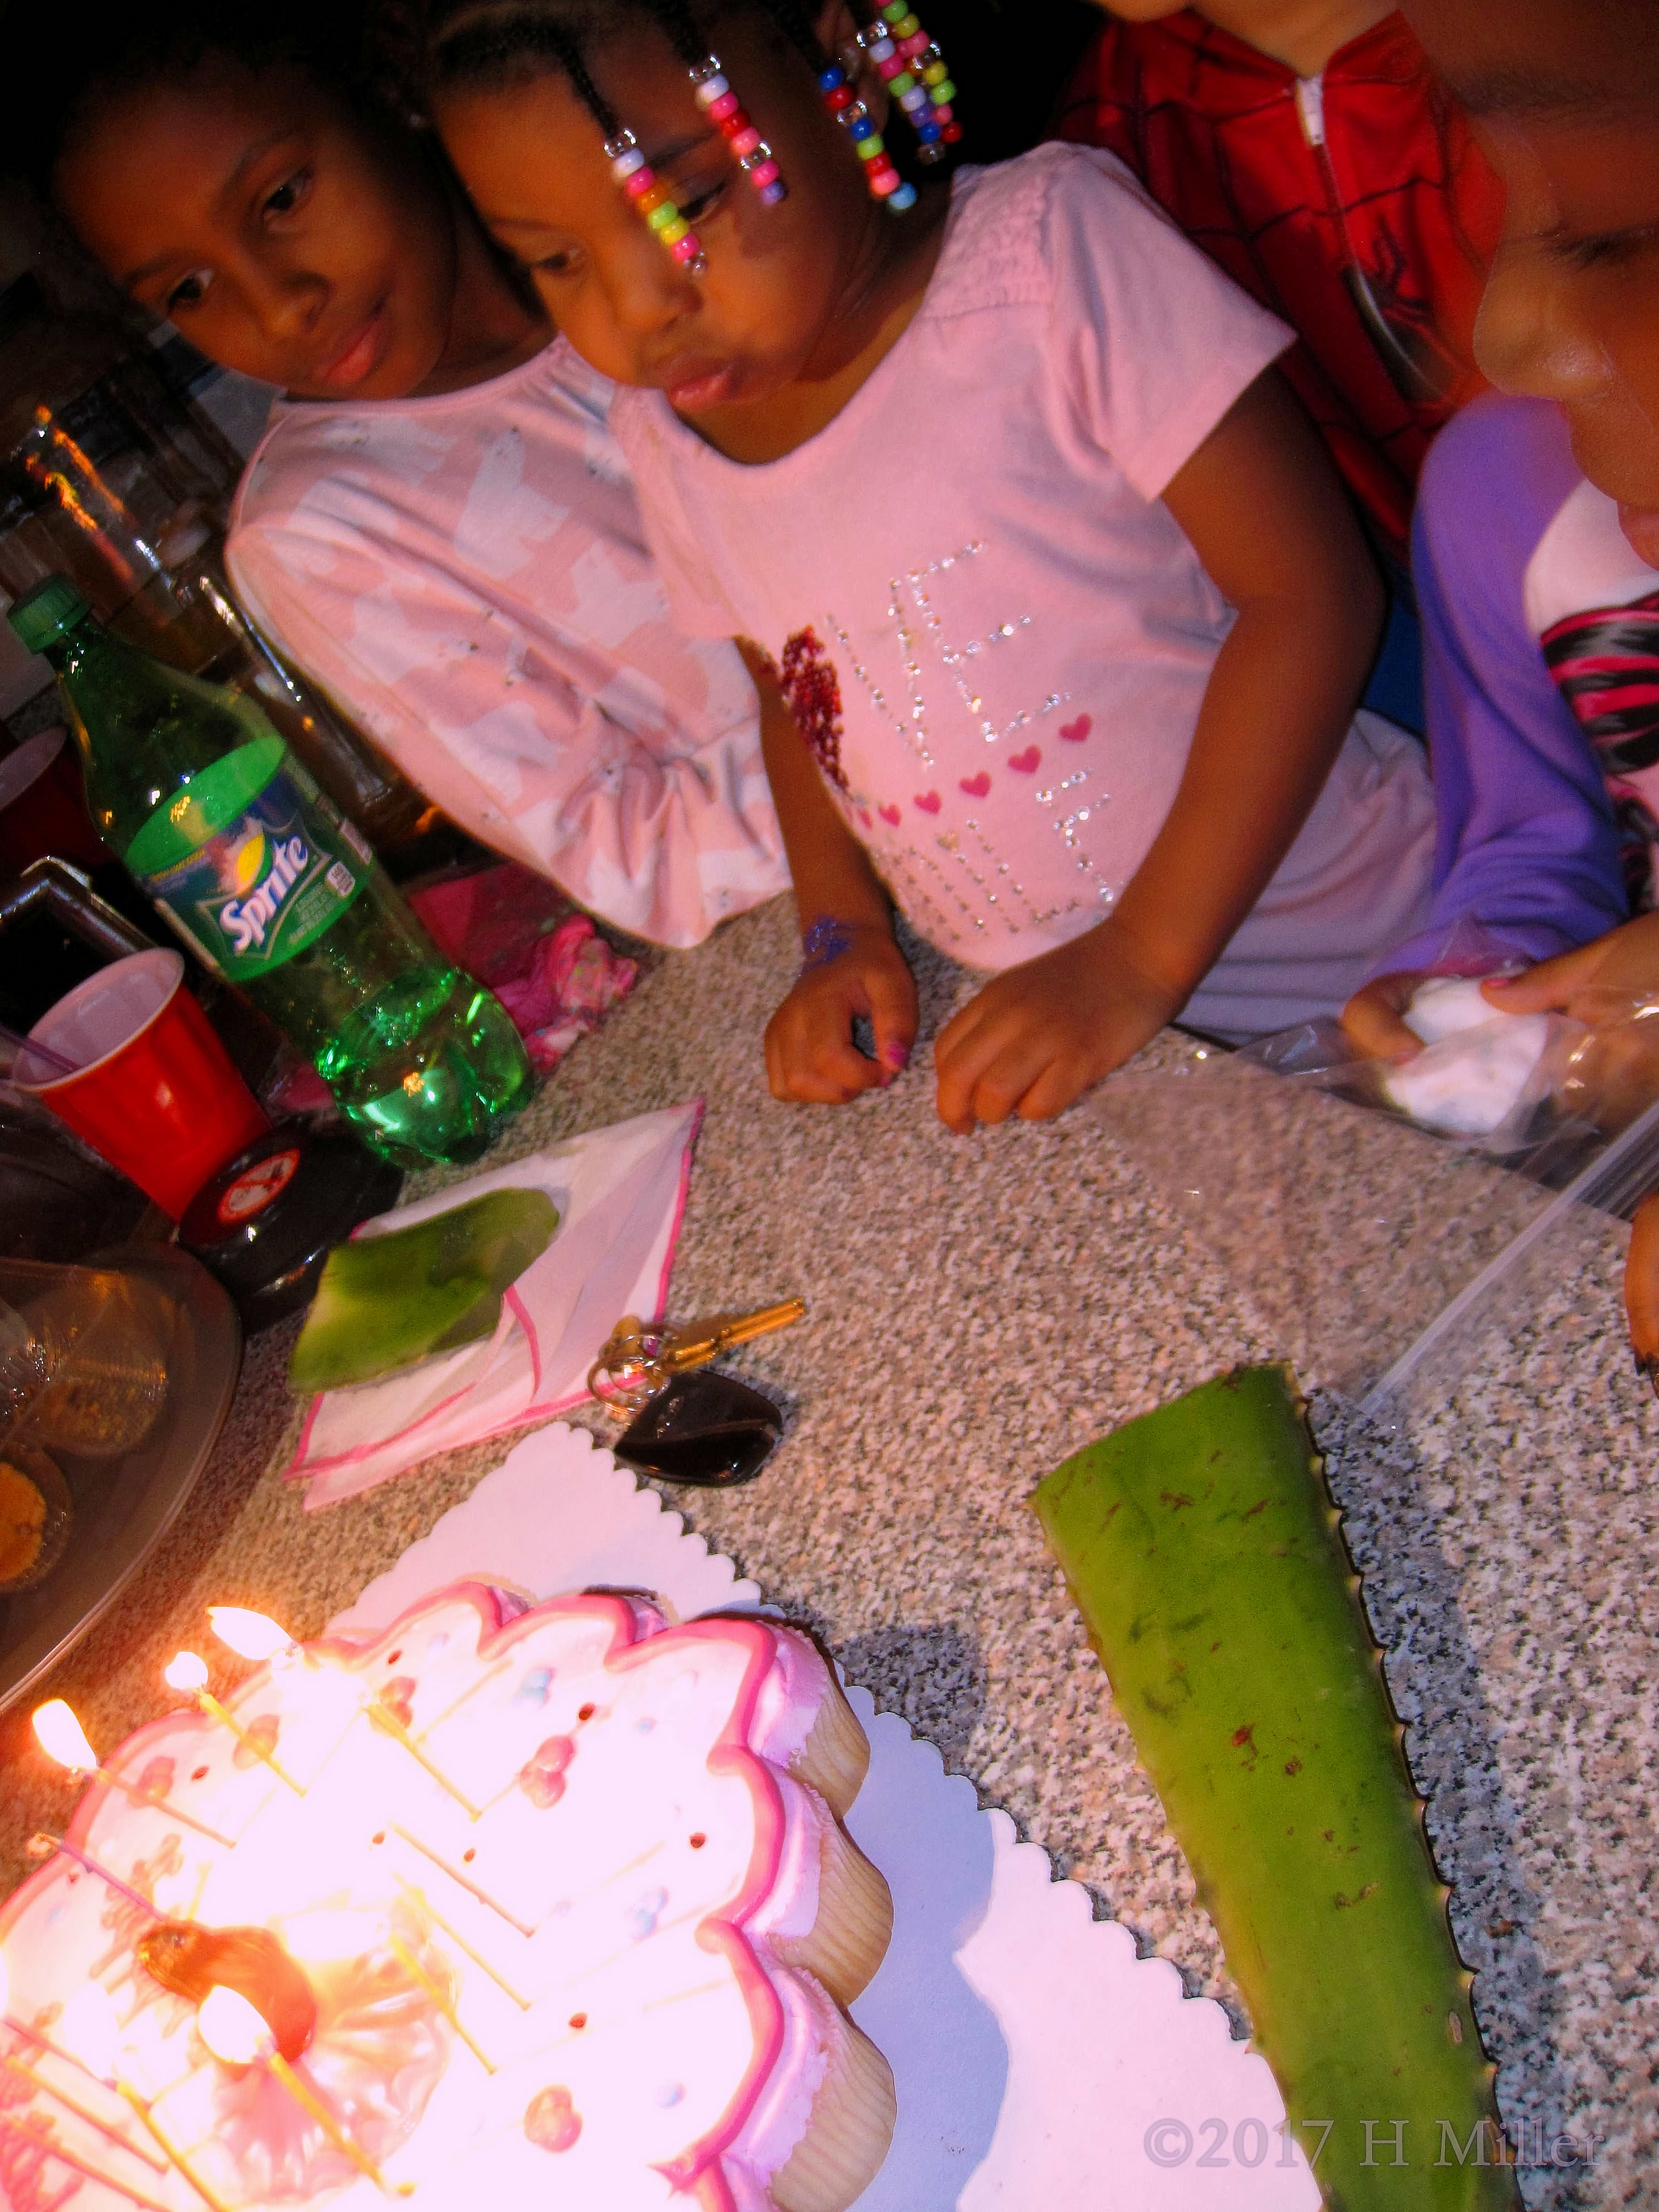 She Is About To Blow Out The Candles! 